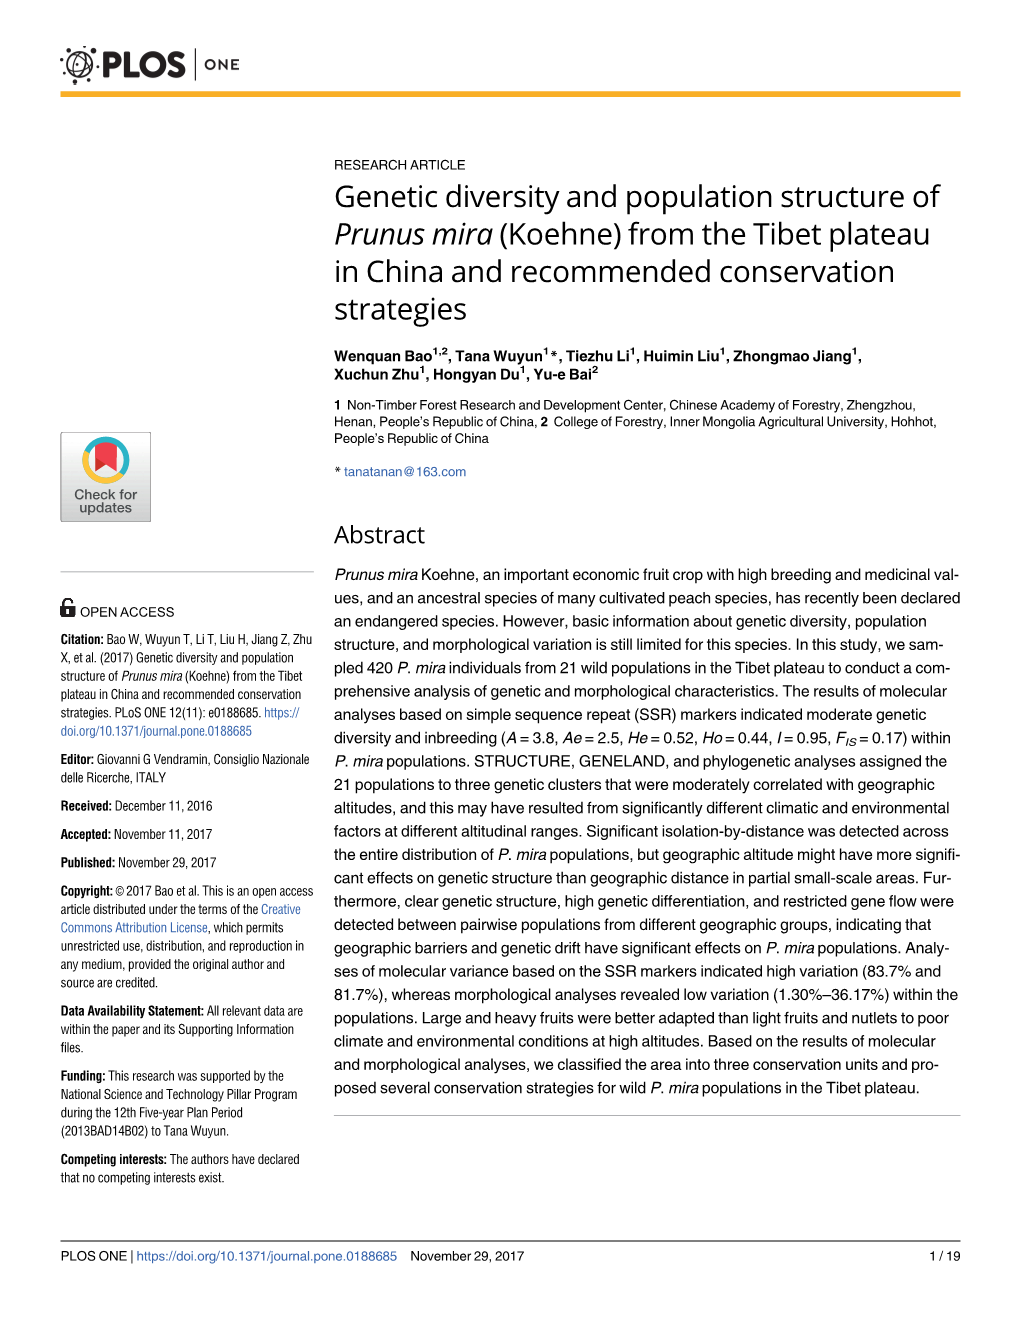 Genetic Diversity and Population Structure of Prunus Mira (Koehne) from the Tibet Plateau in China and Recommended Conservation Strategies